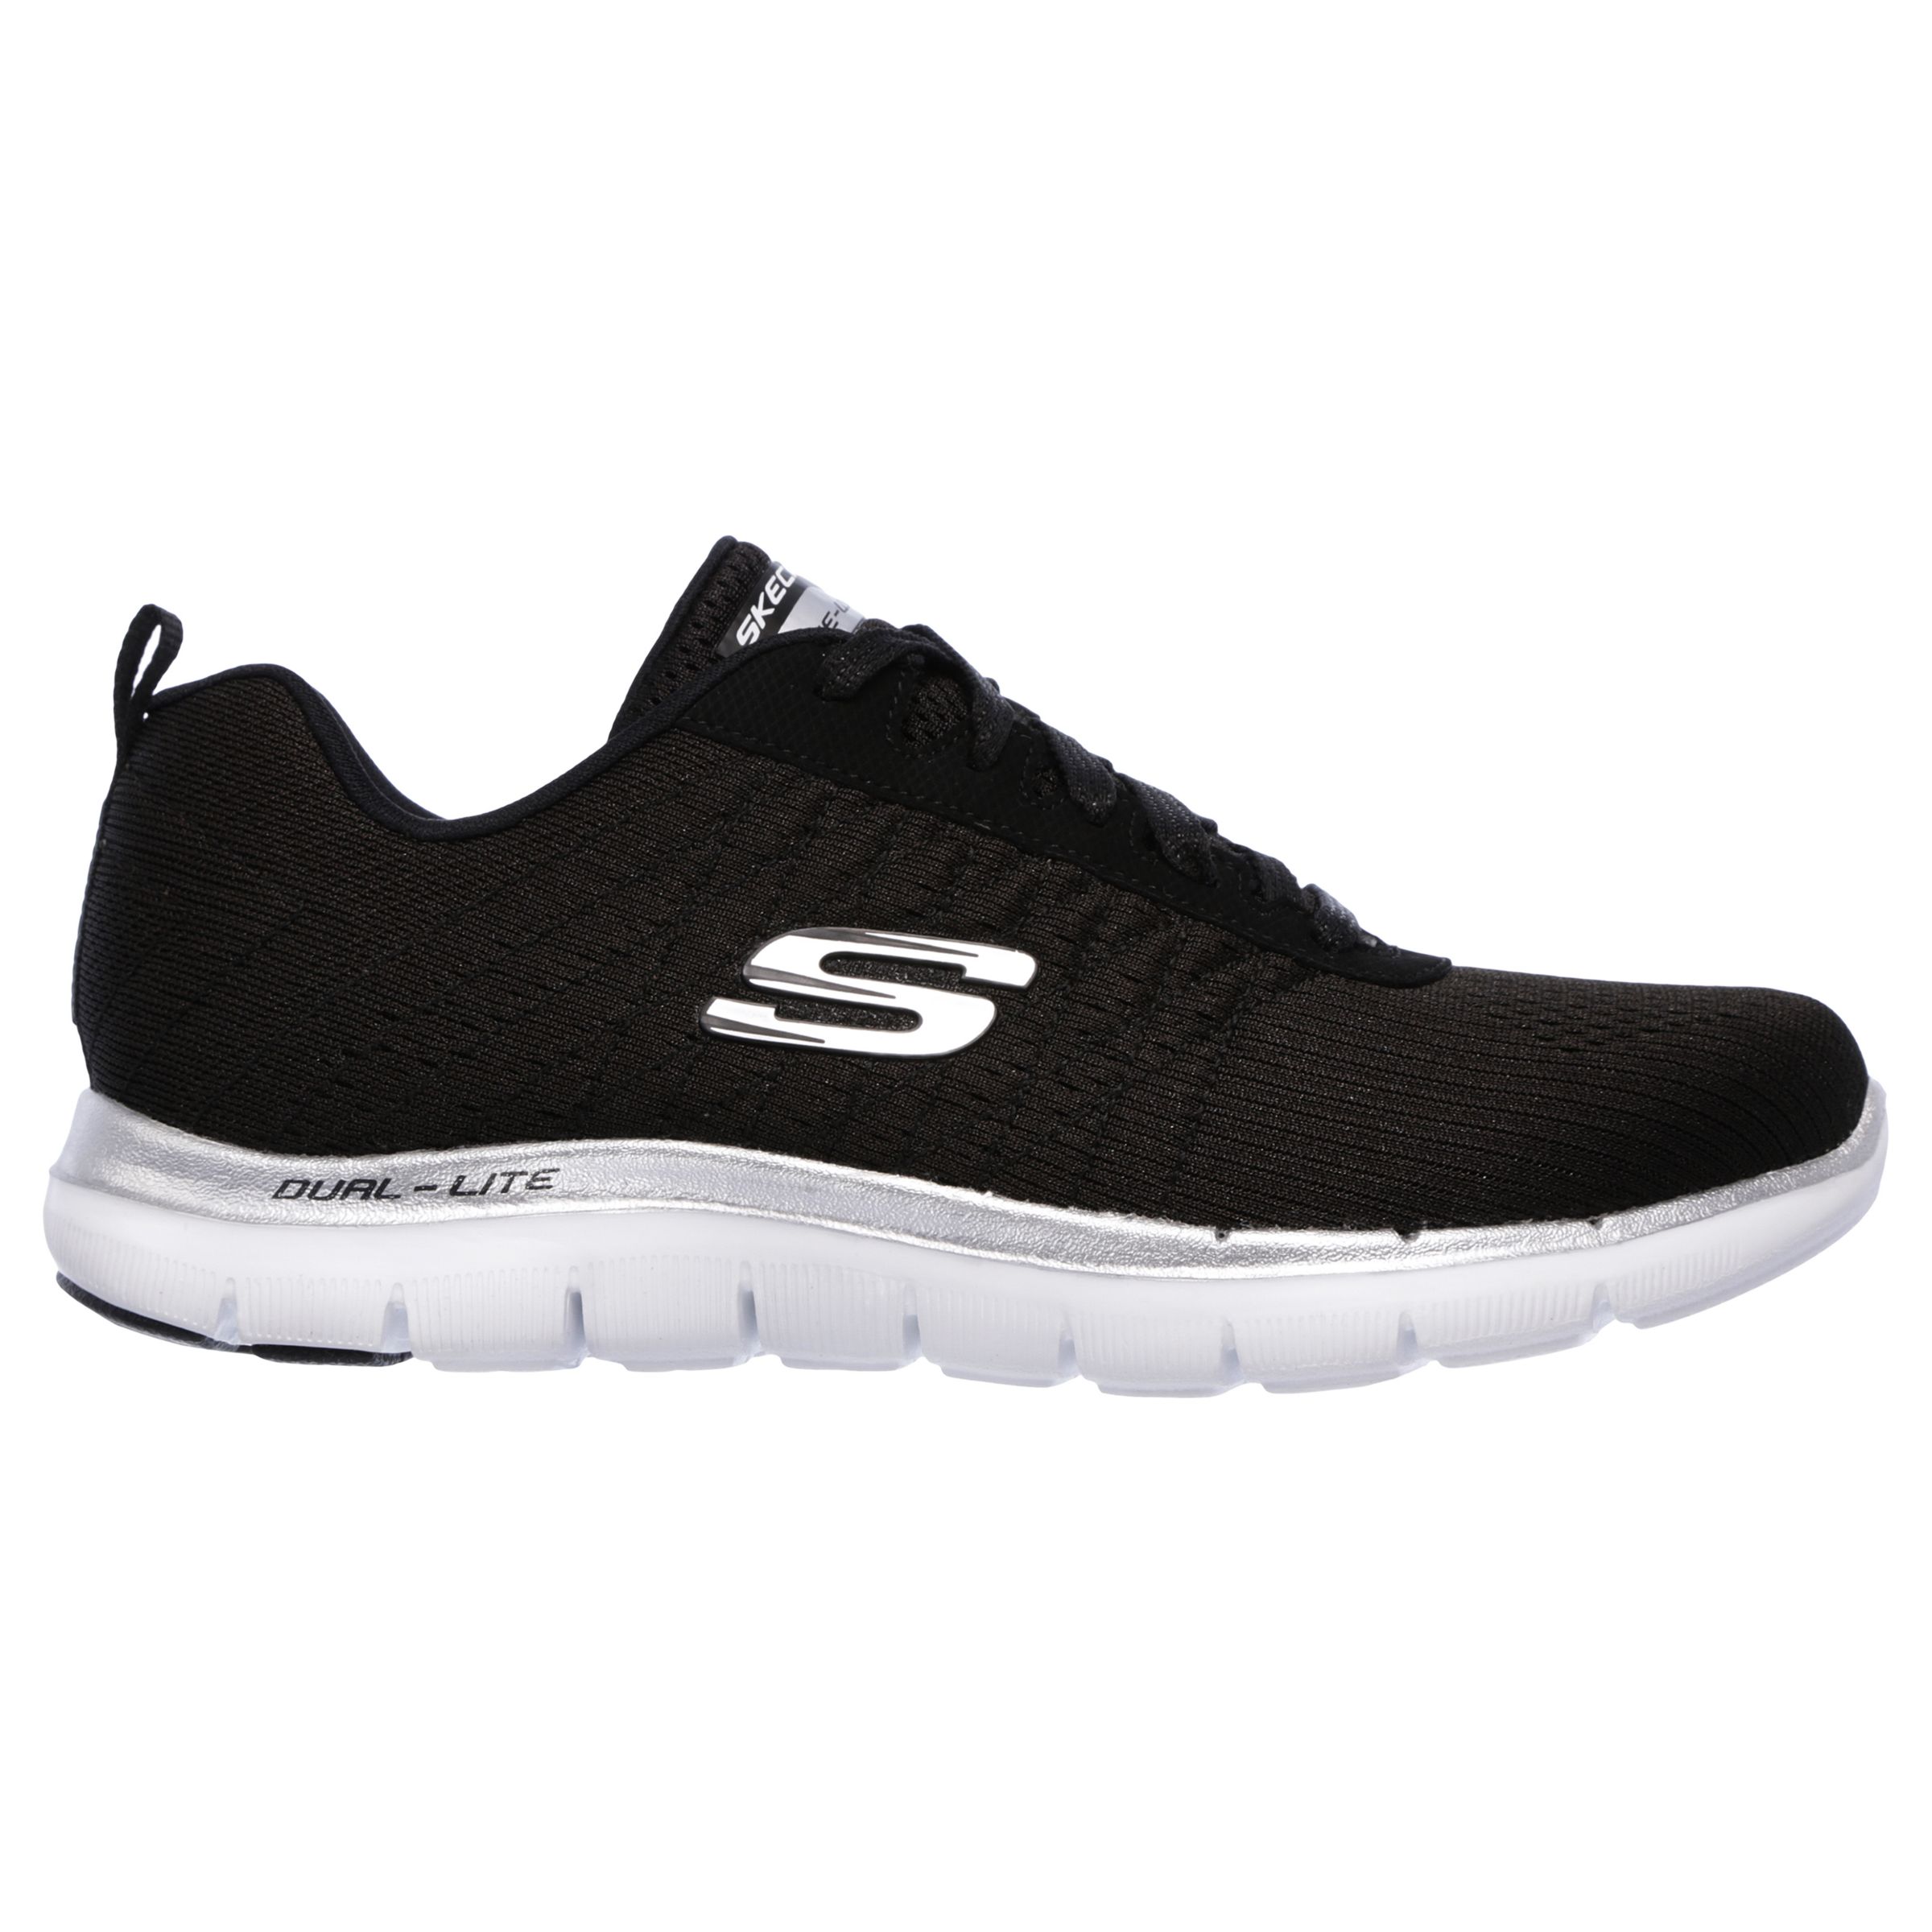 skechers flex appeal black and white